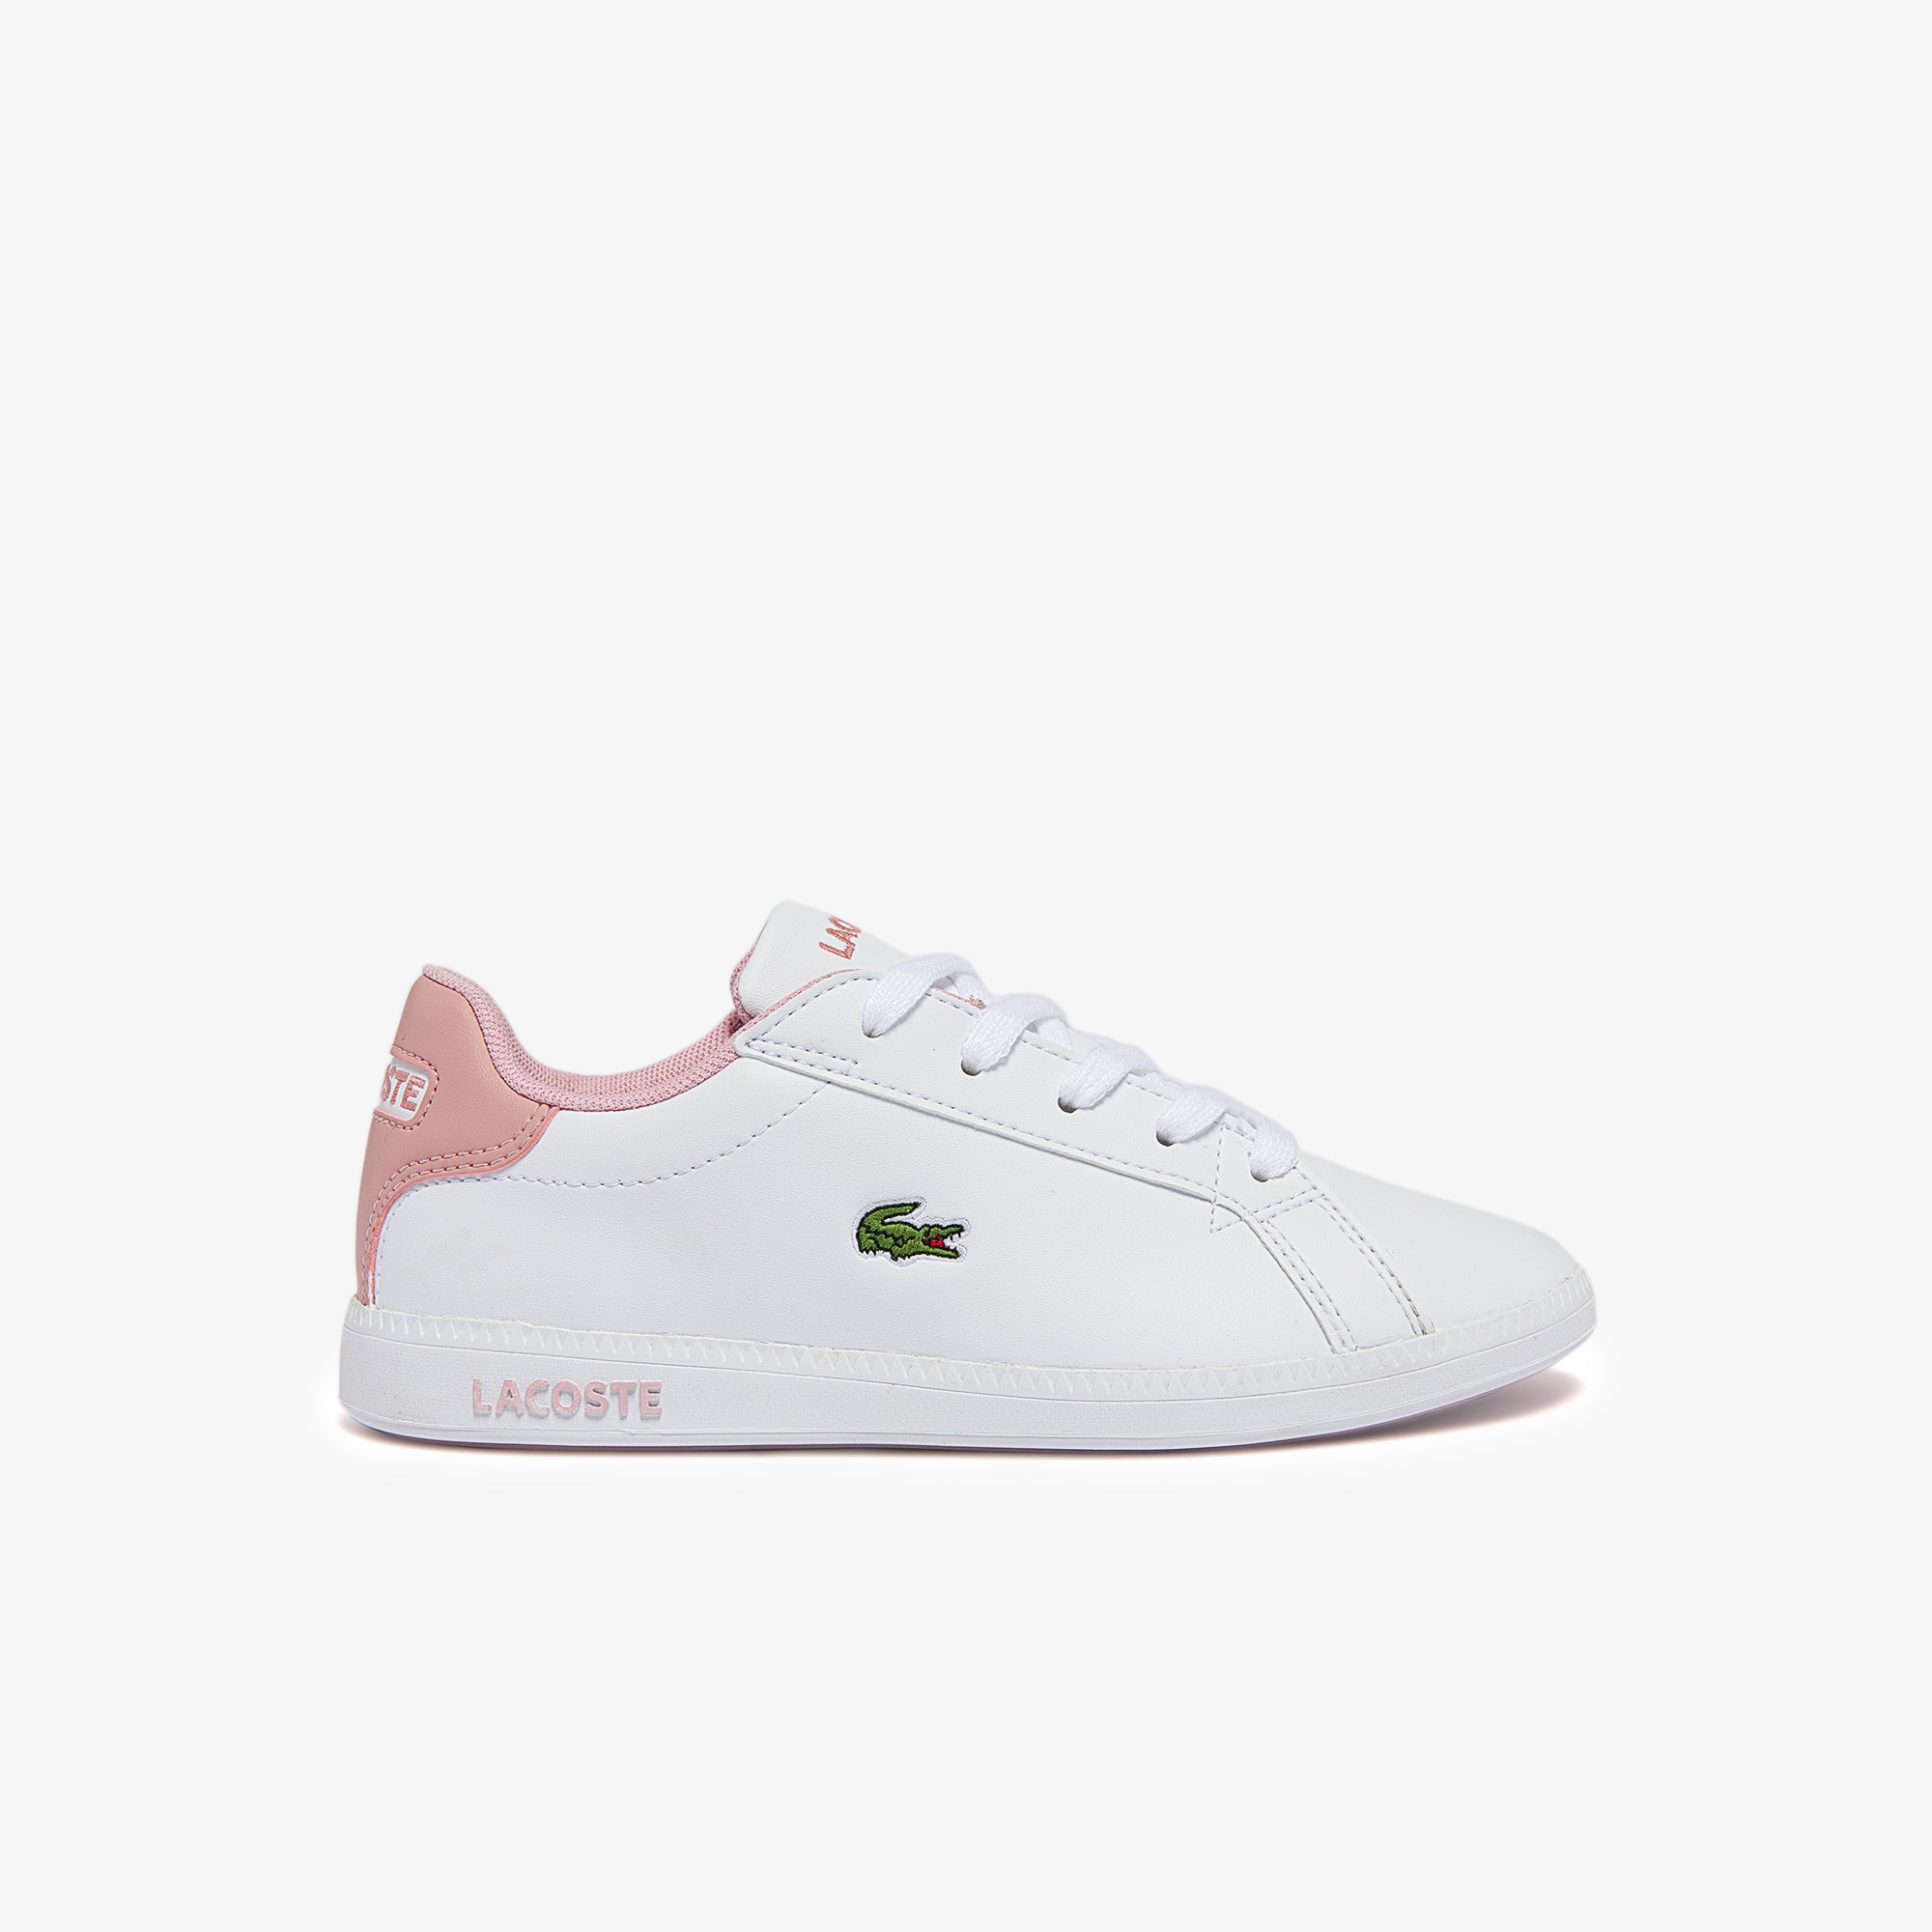 Lacoste Children's Graduate Synthetic Trainers Size 1 UK White & Light Pink